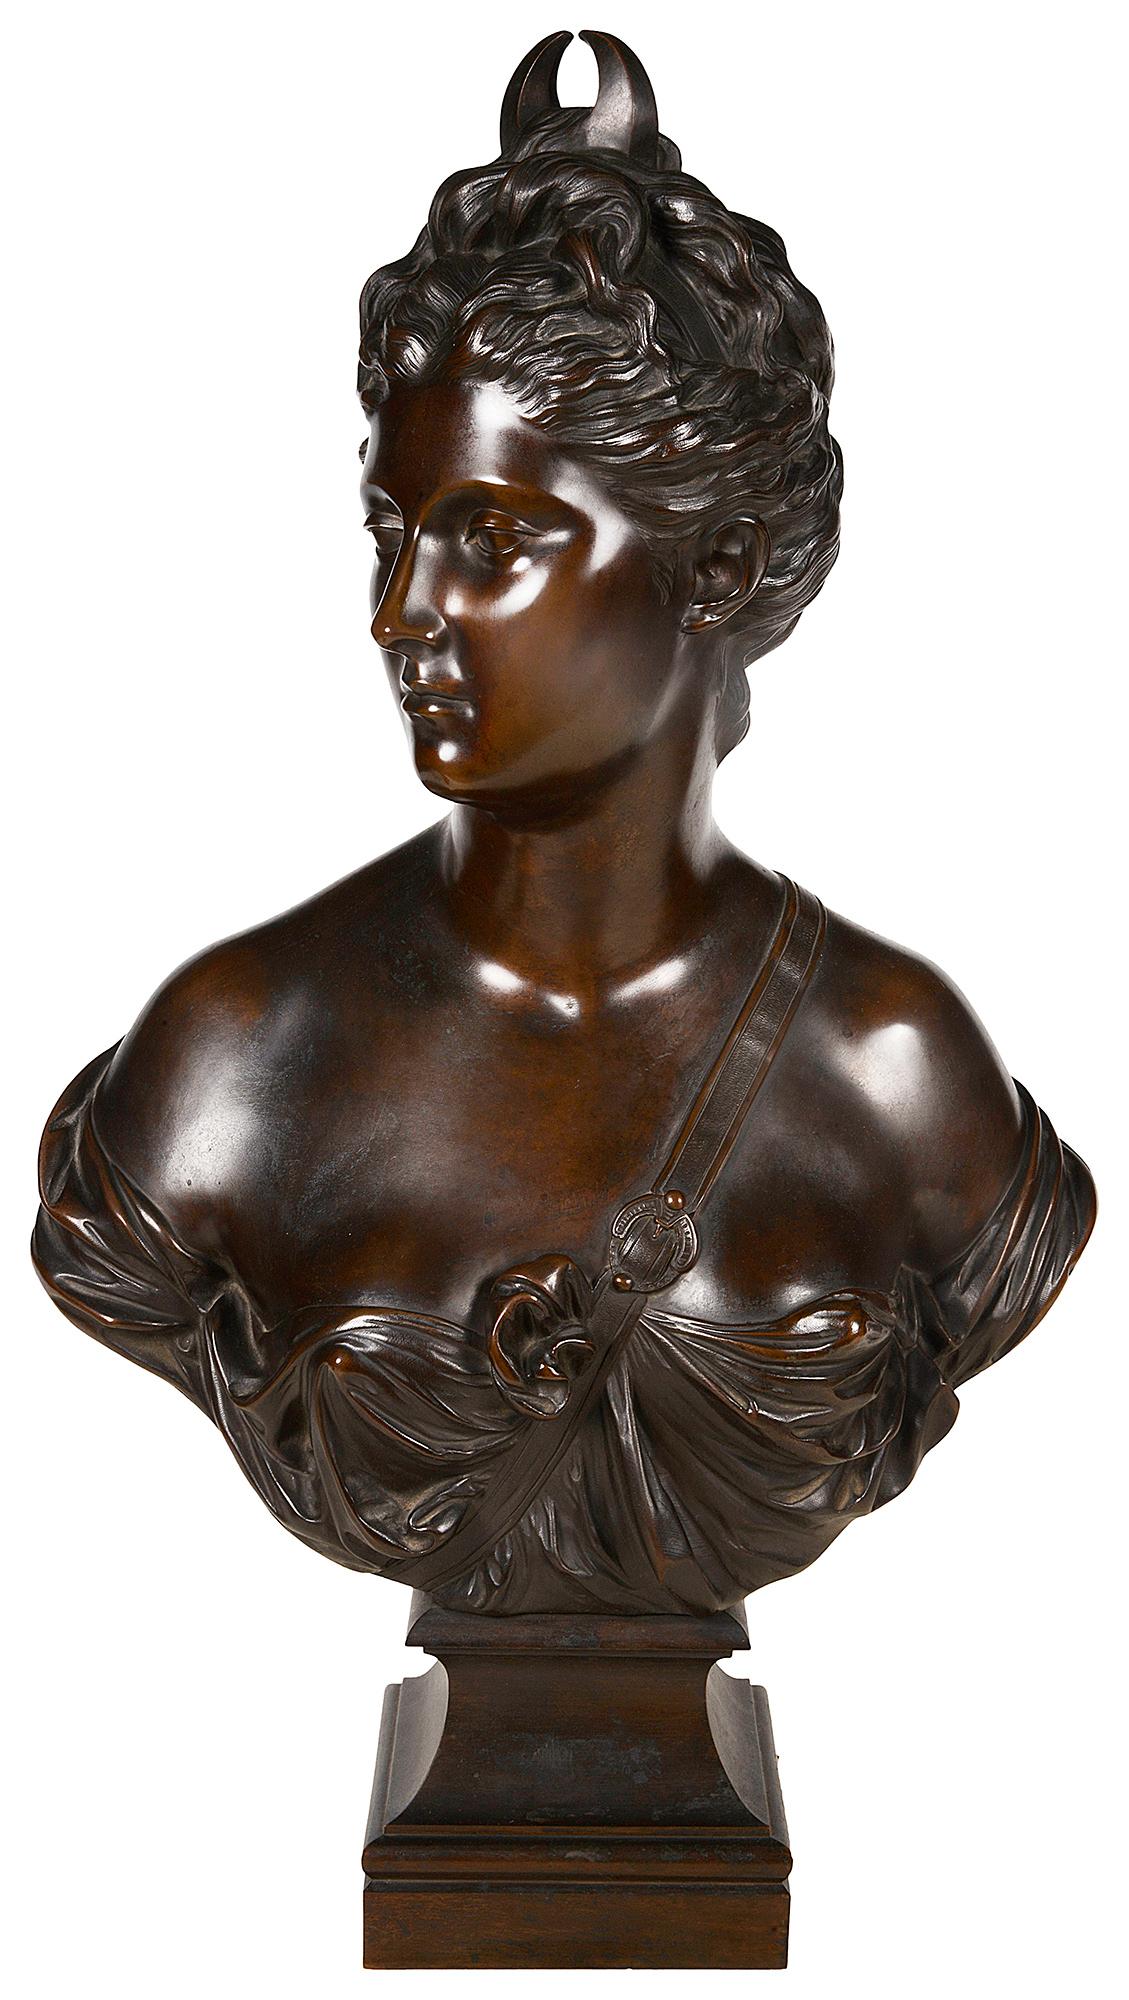 A very good quality 19th century bronze patinated bronze bust of Diana, raised on a plinth base.

Diana is a goddess in Roman and Hellenistic religion, primarily considered a patroness of the countryside, hunters, crossroads, and the Moon. She is